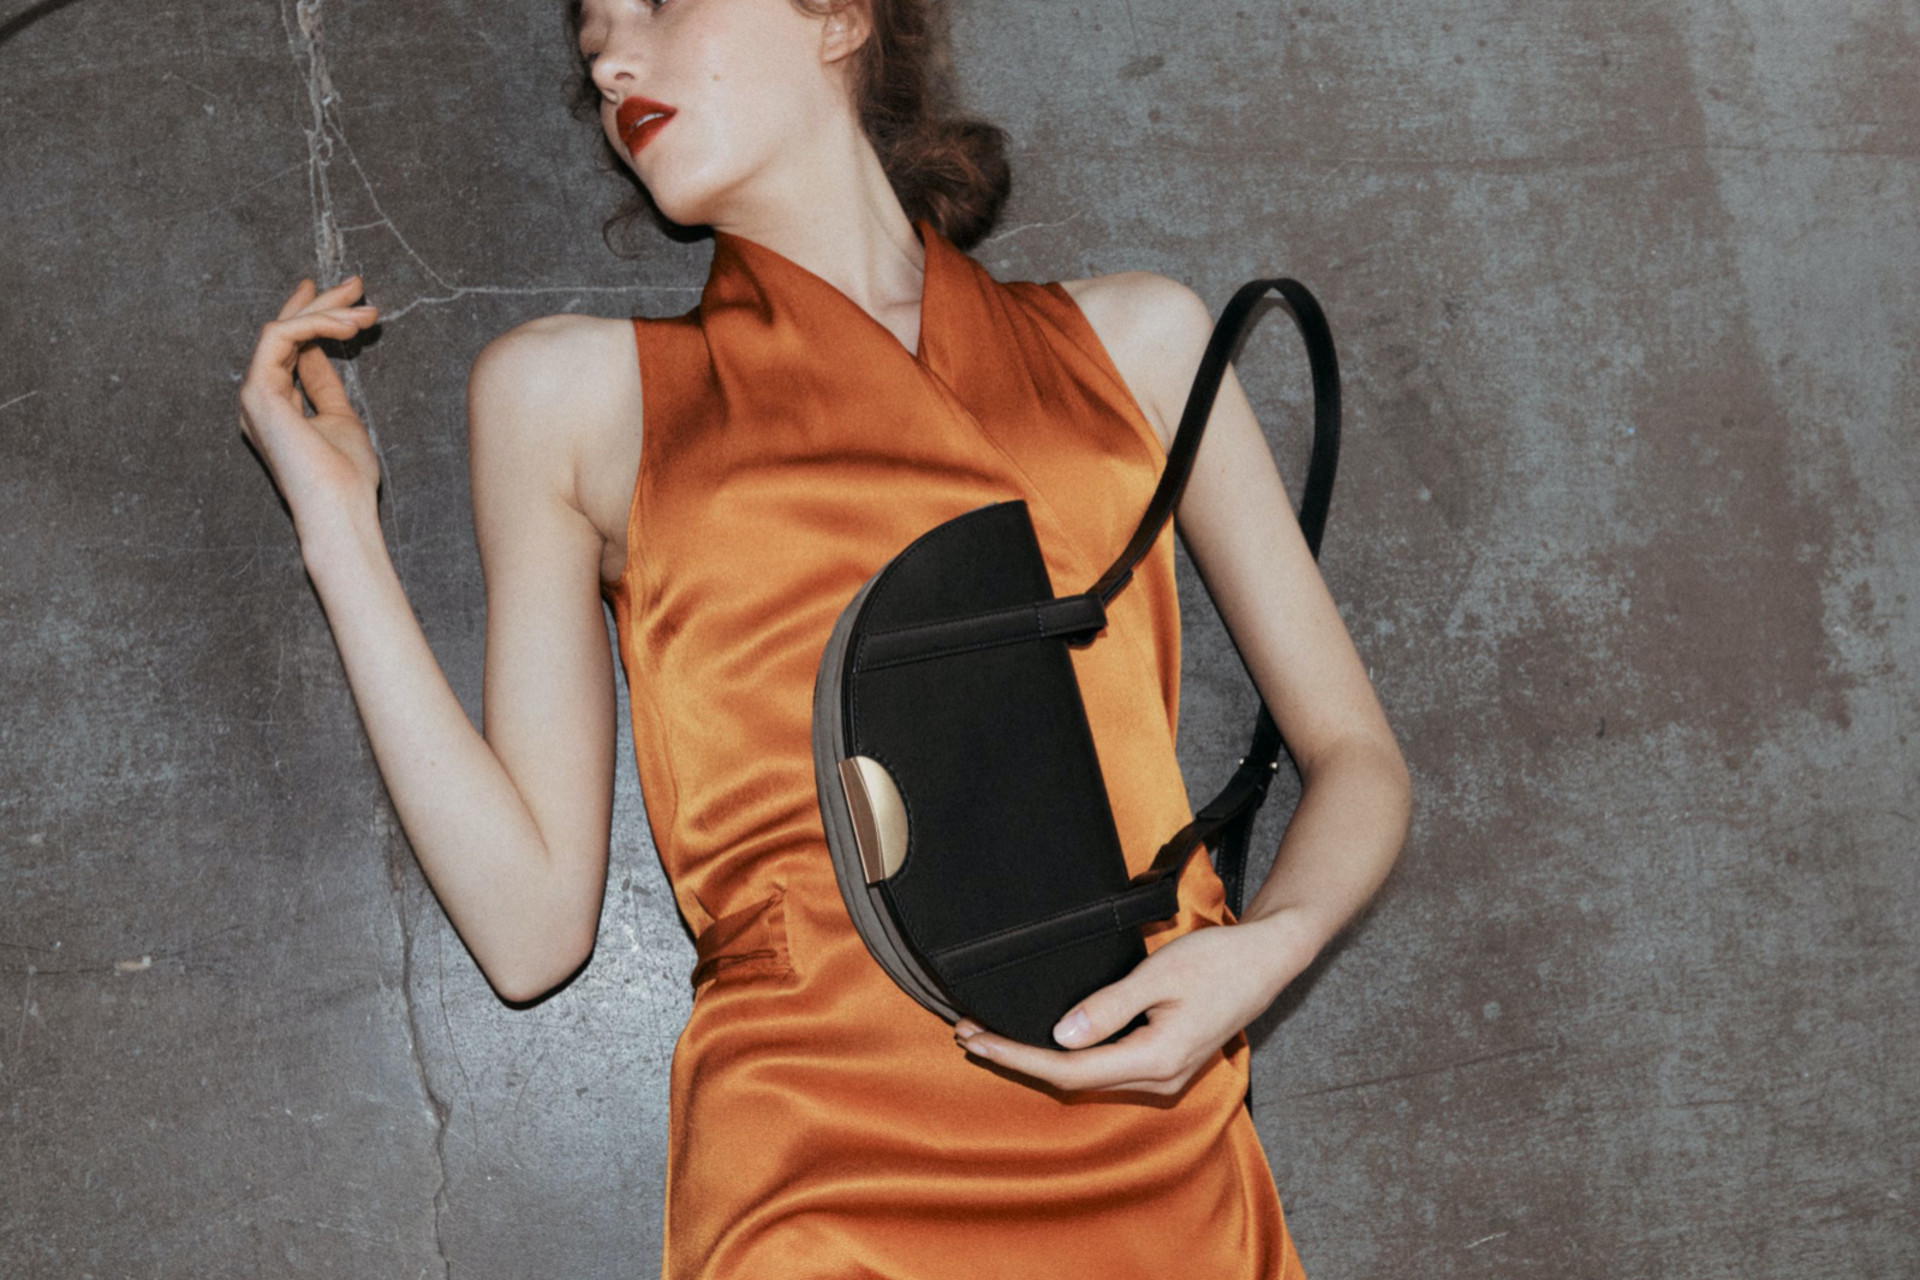 Woman in orange dress laying on floor with black handbag in her arms